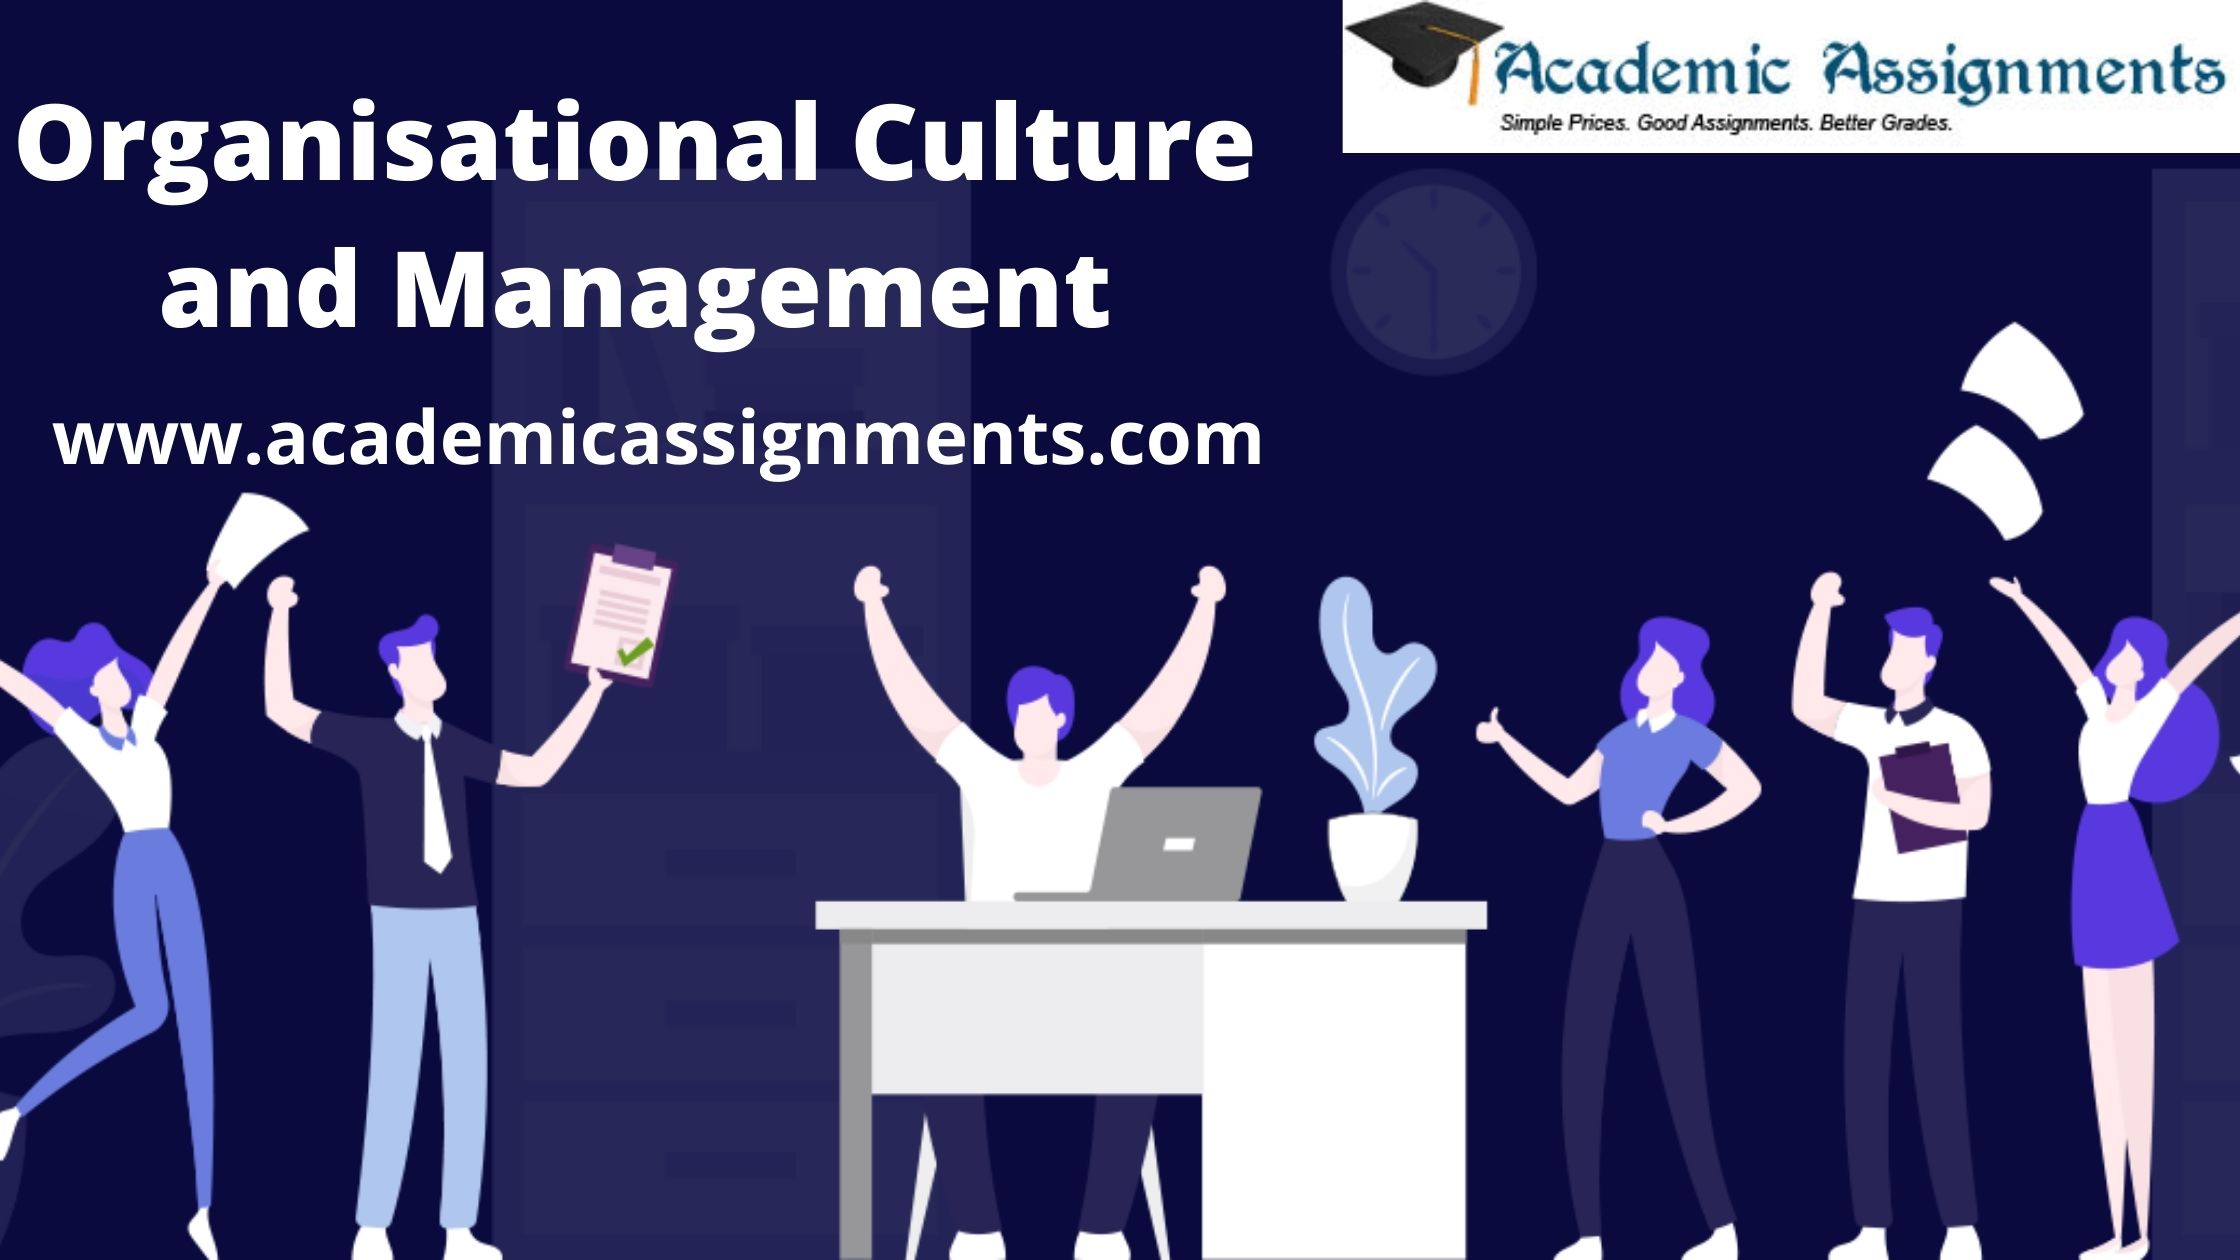 Organisational Culture and Management